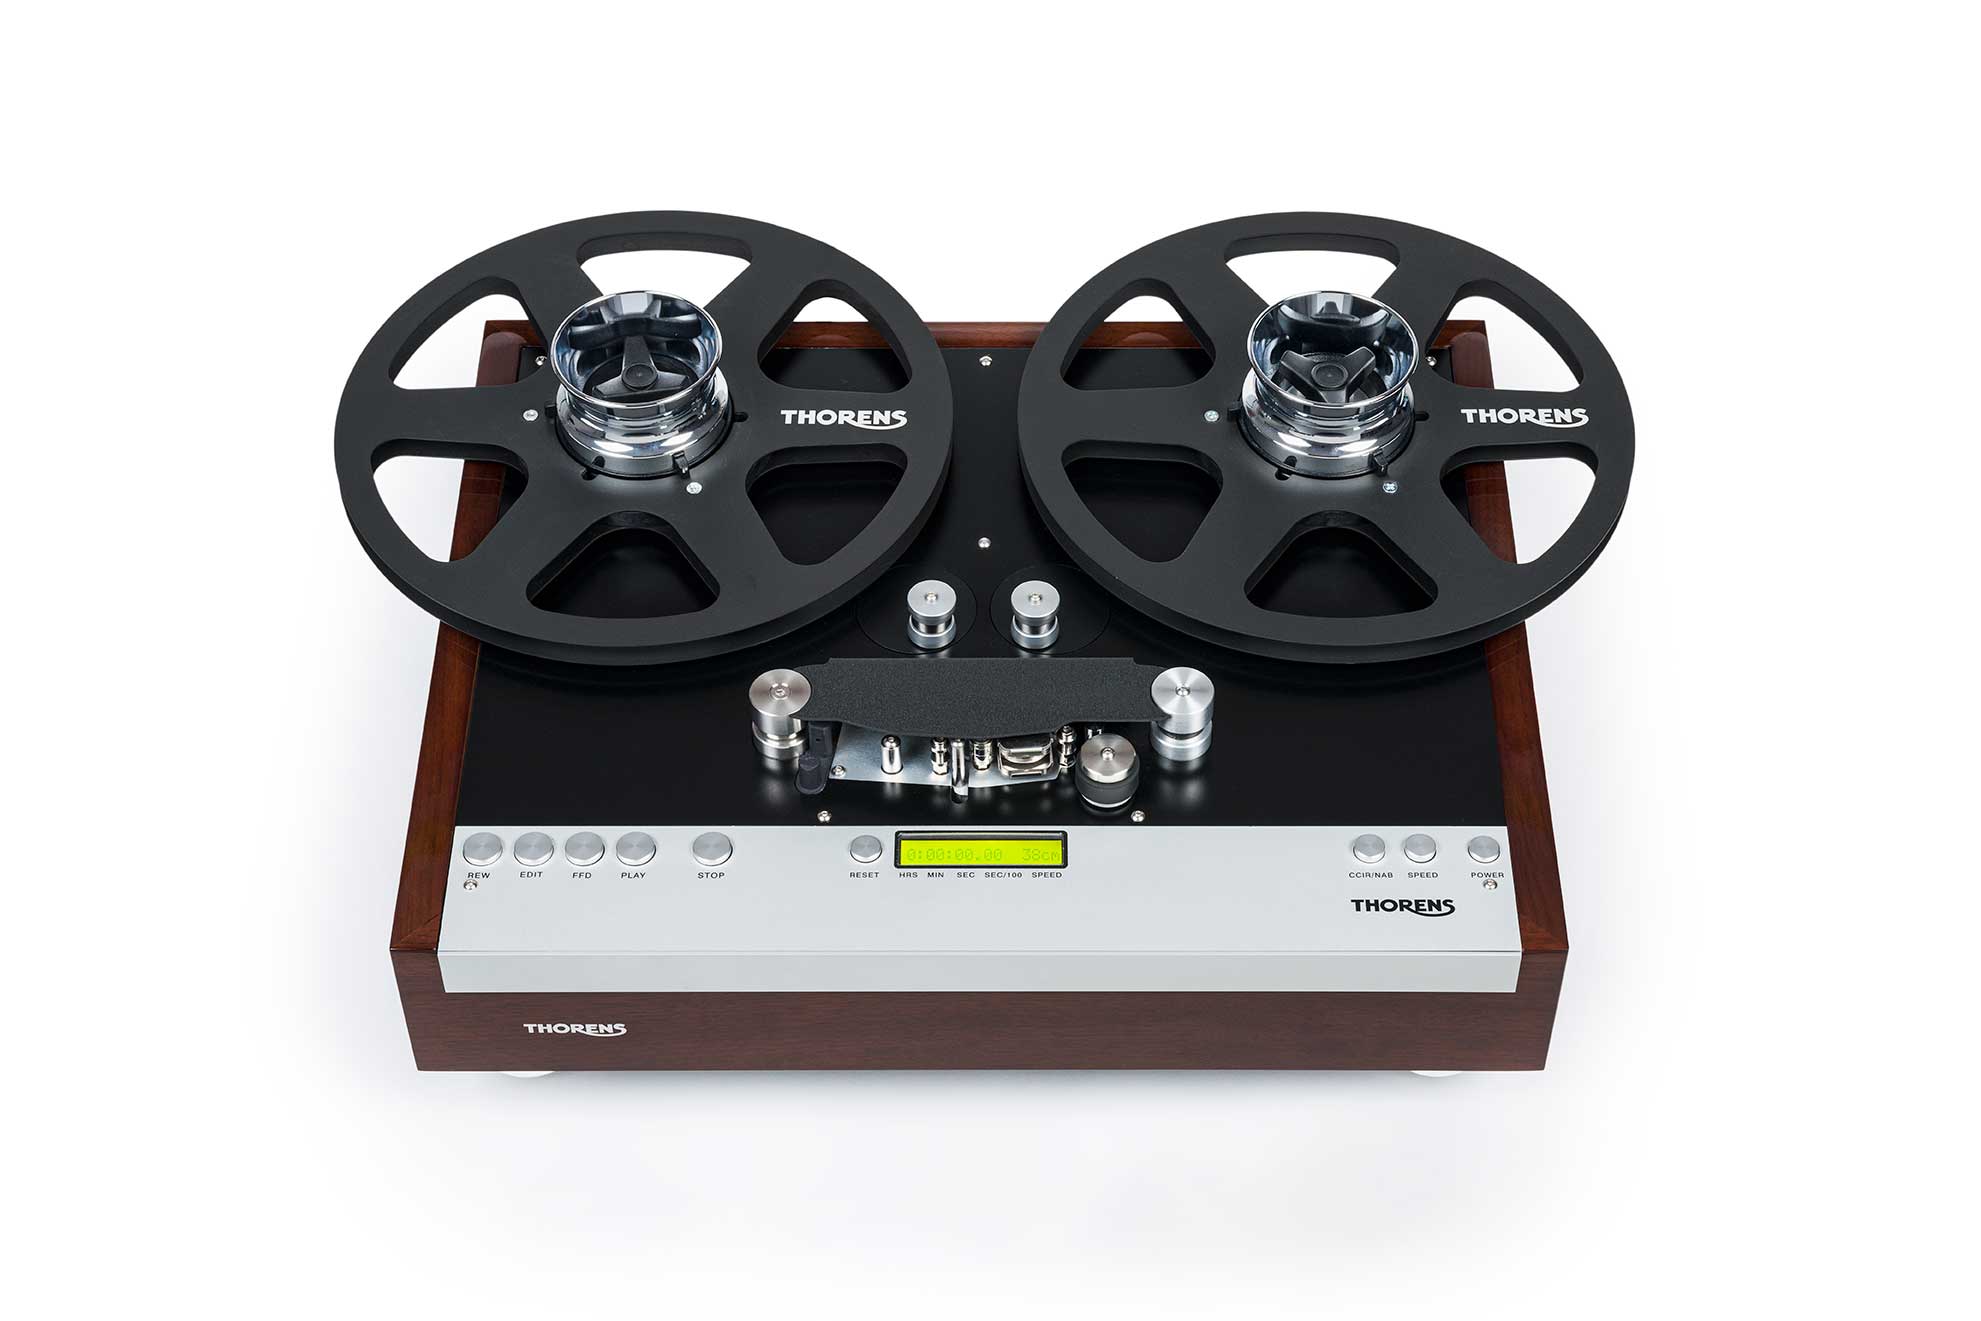 Where To Buy Reel To Reel Players (New, Refurbished & Used) - RX Reels